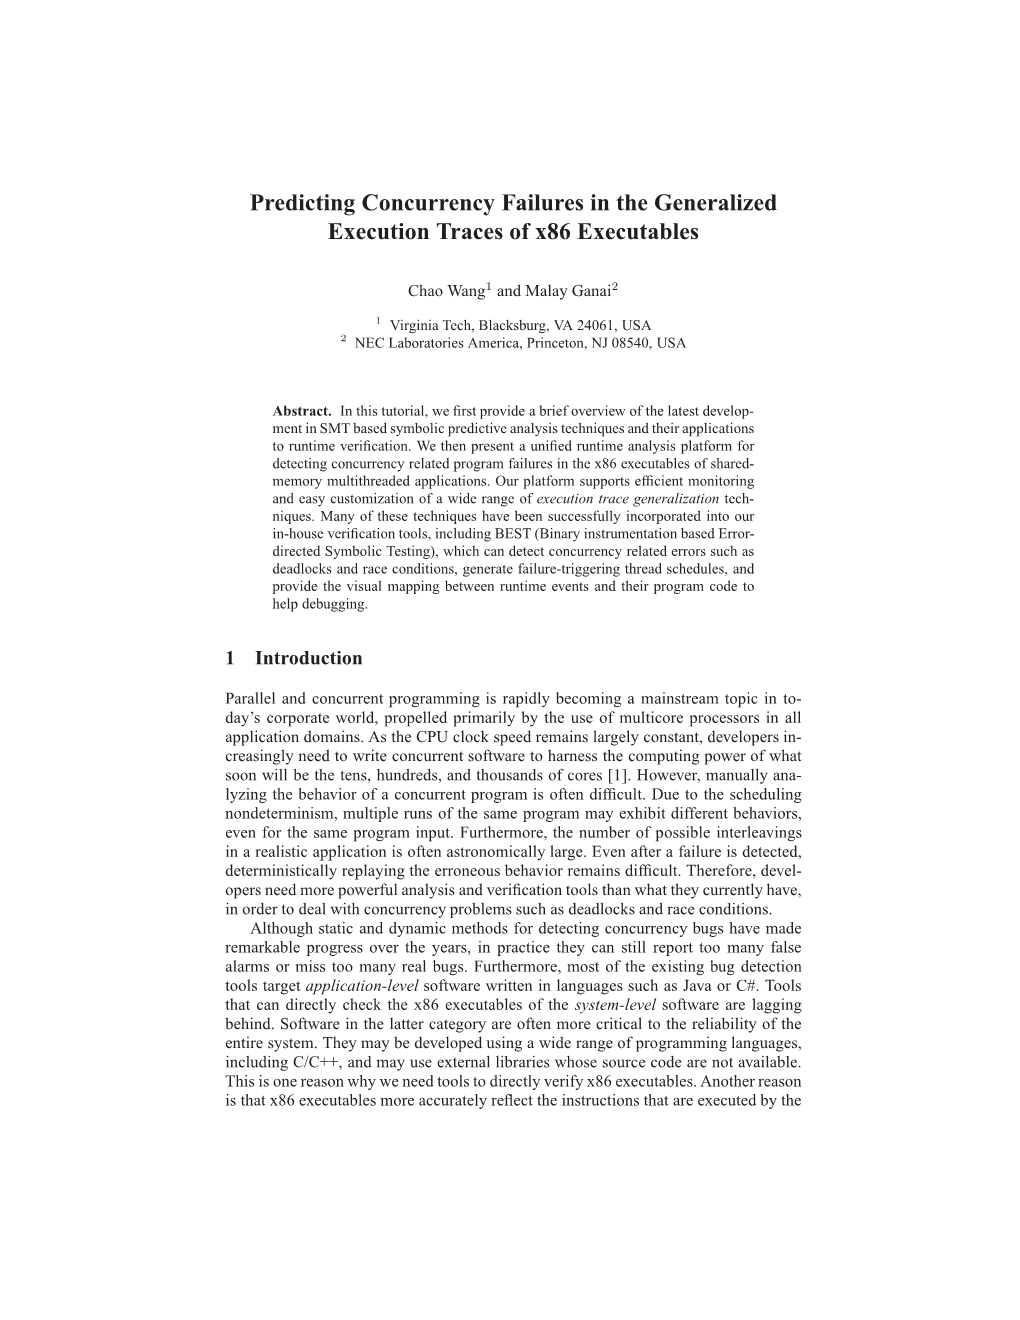 Predicting Concurrency Failures in the Generalized Execution Traces of X86 Executables